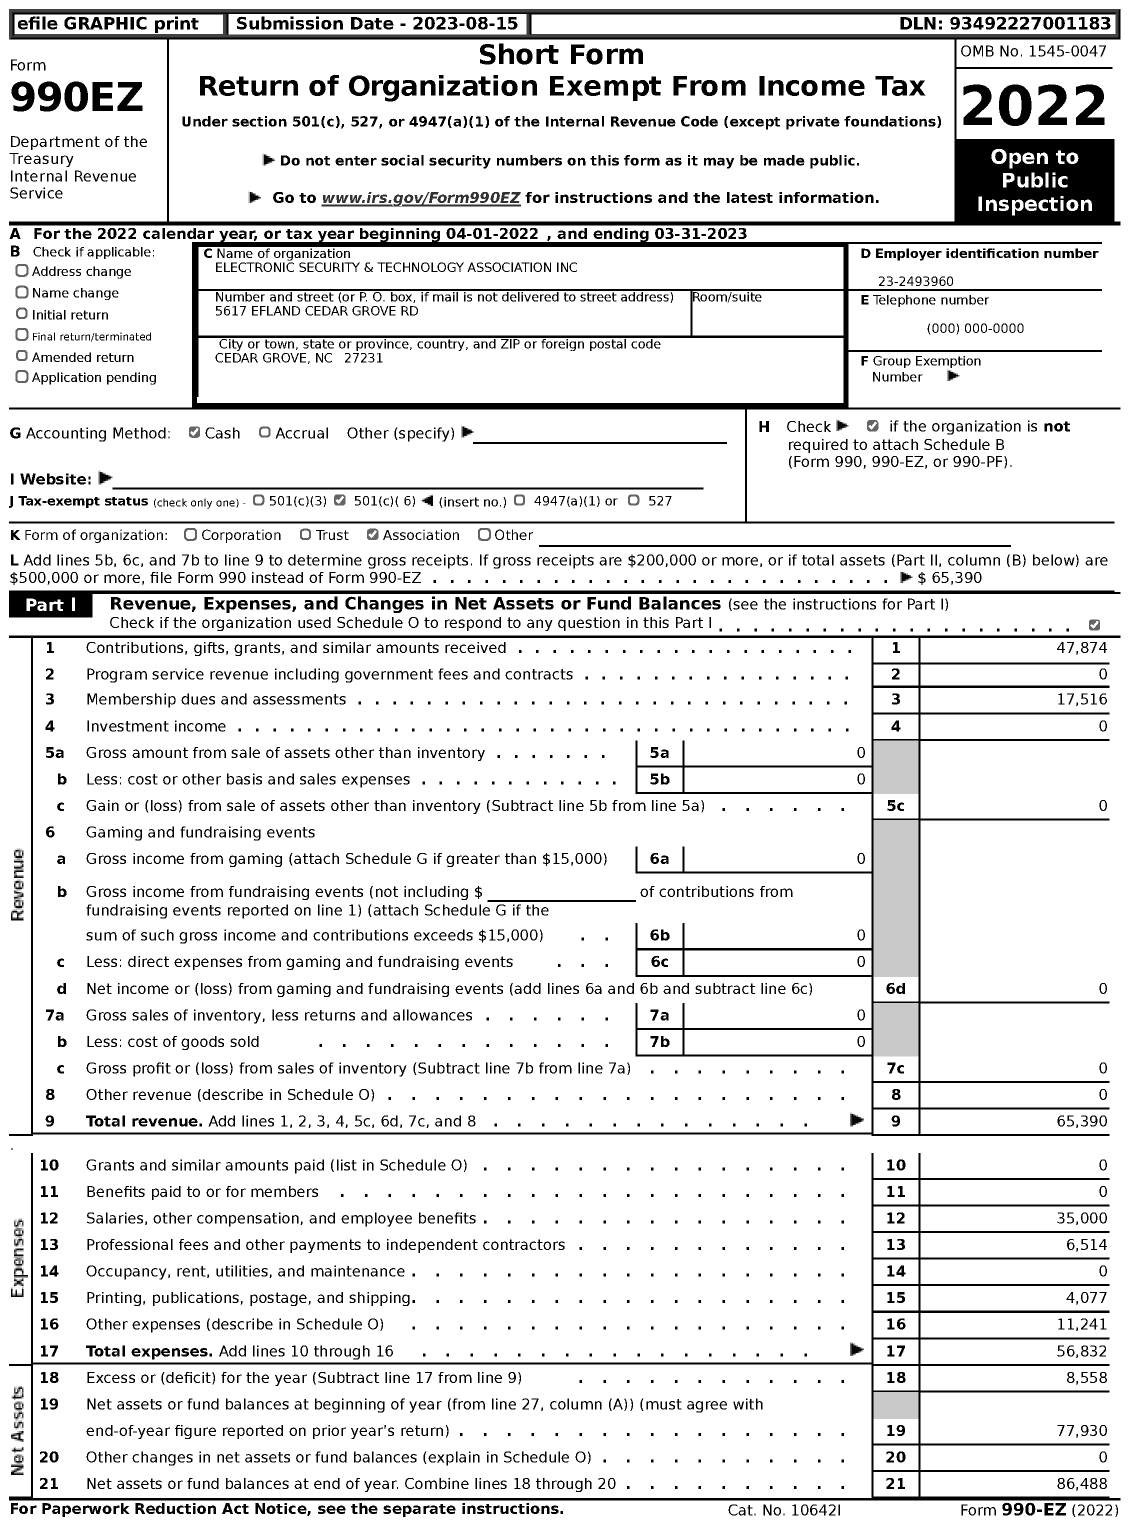 Image of first page of 2022 Form 990EZ for Electronic Security and Technology Association